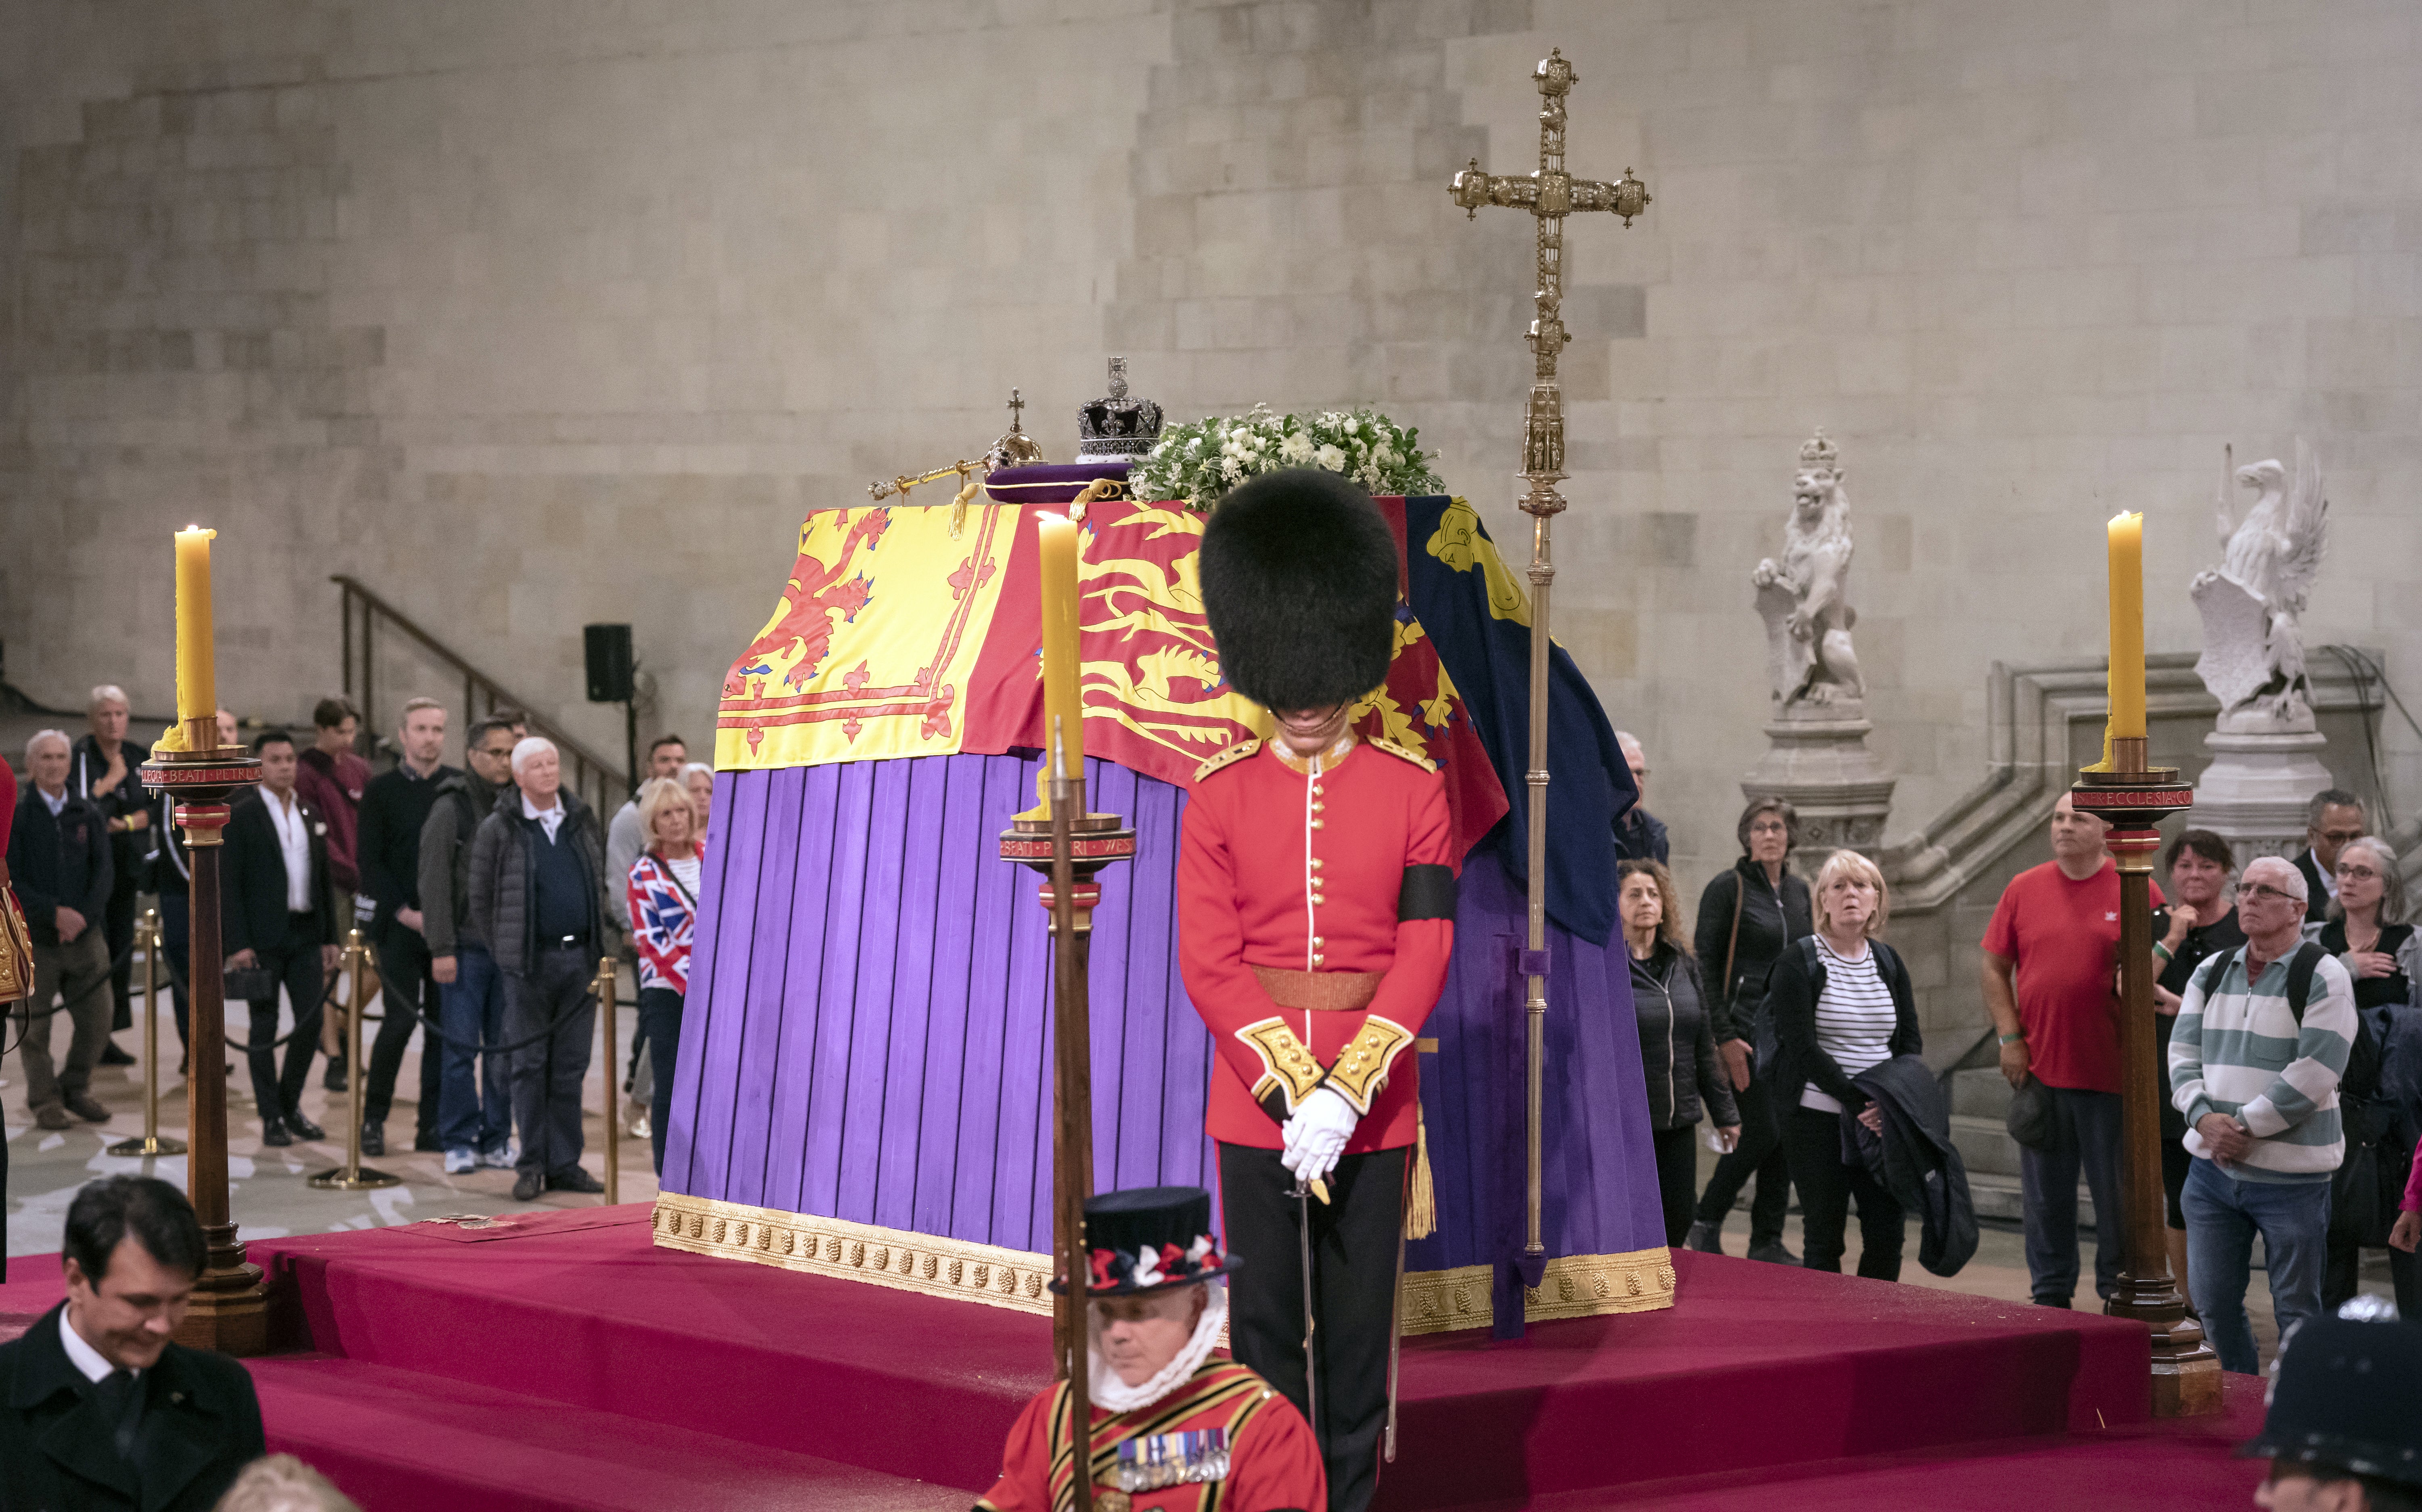 Members of the public file past the Queen’s coffin as it lies in state in Westminster